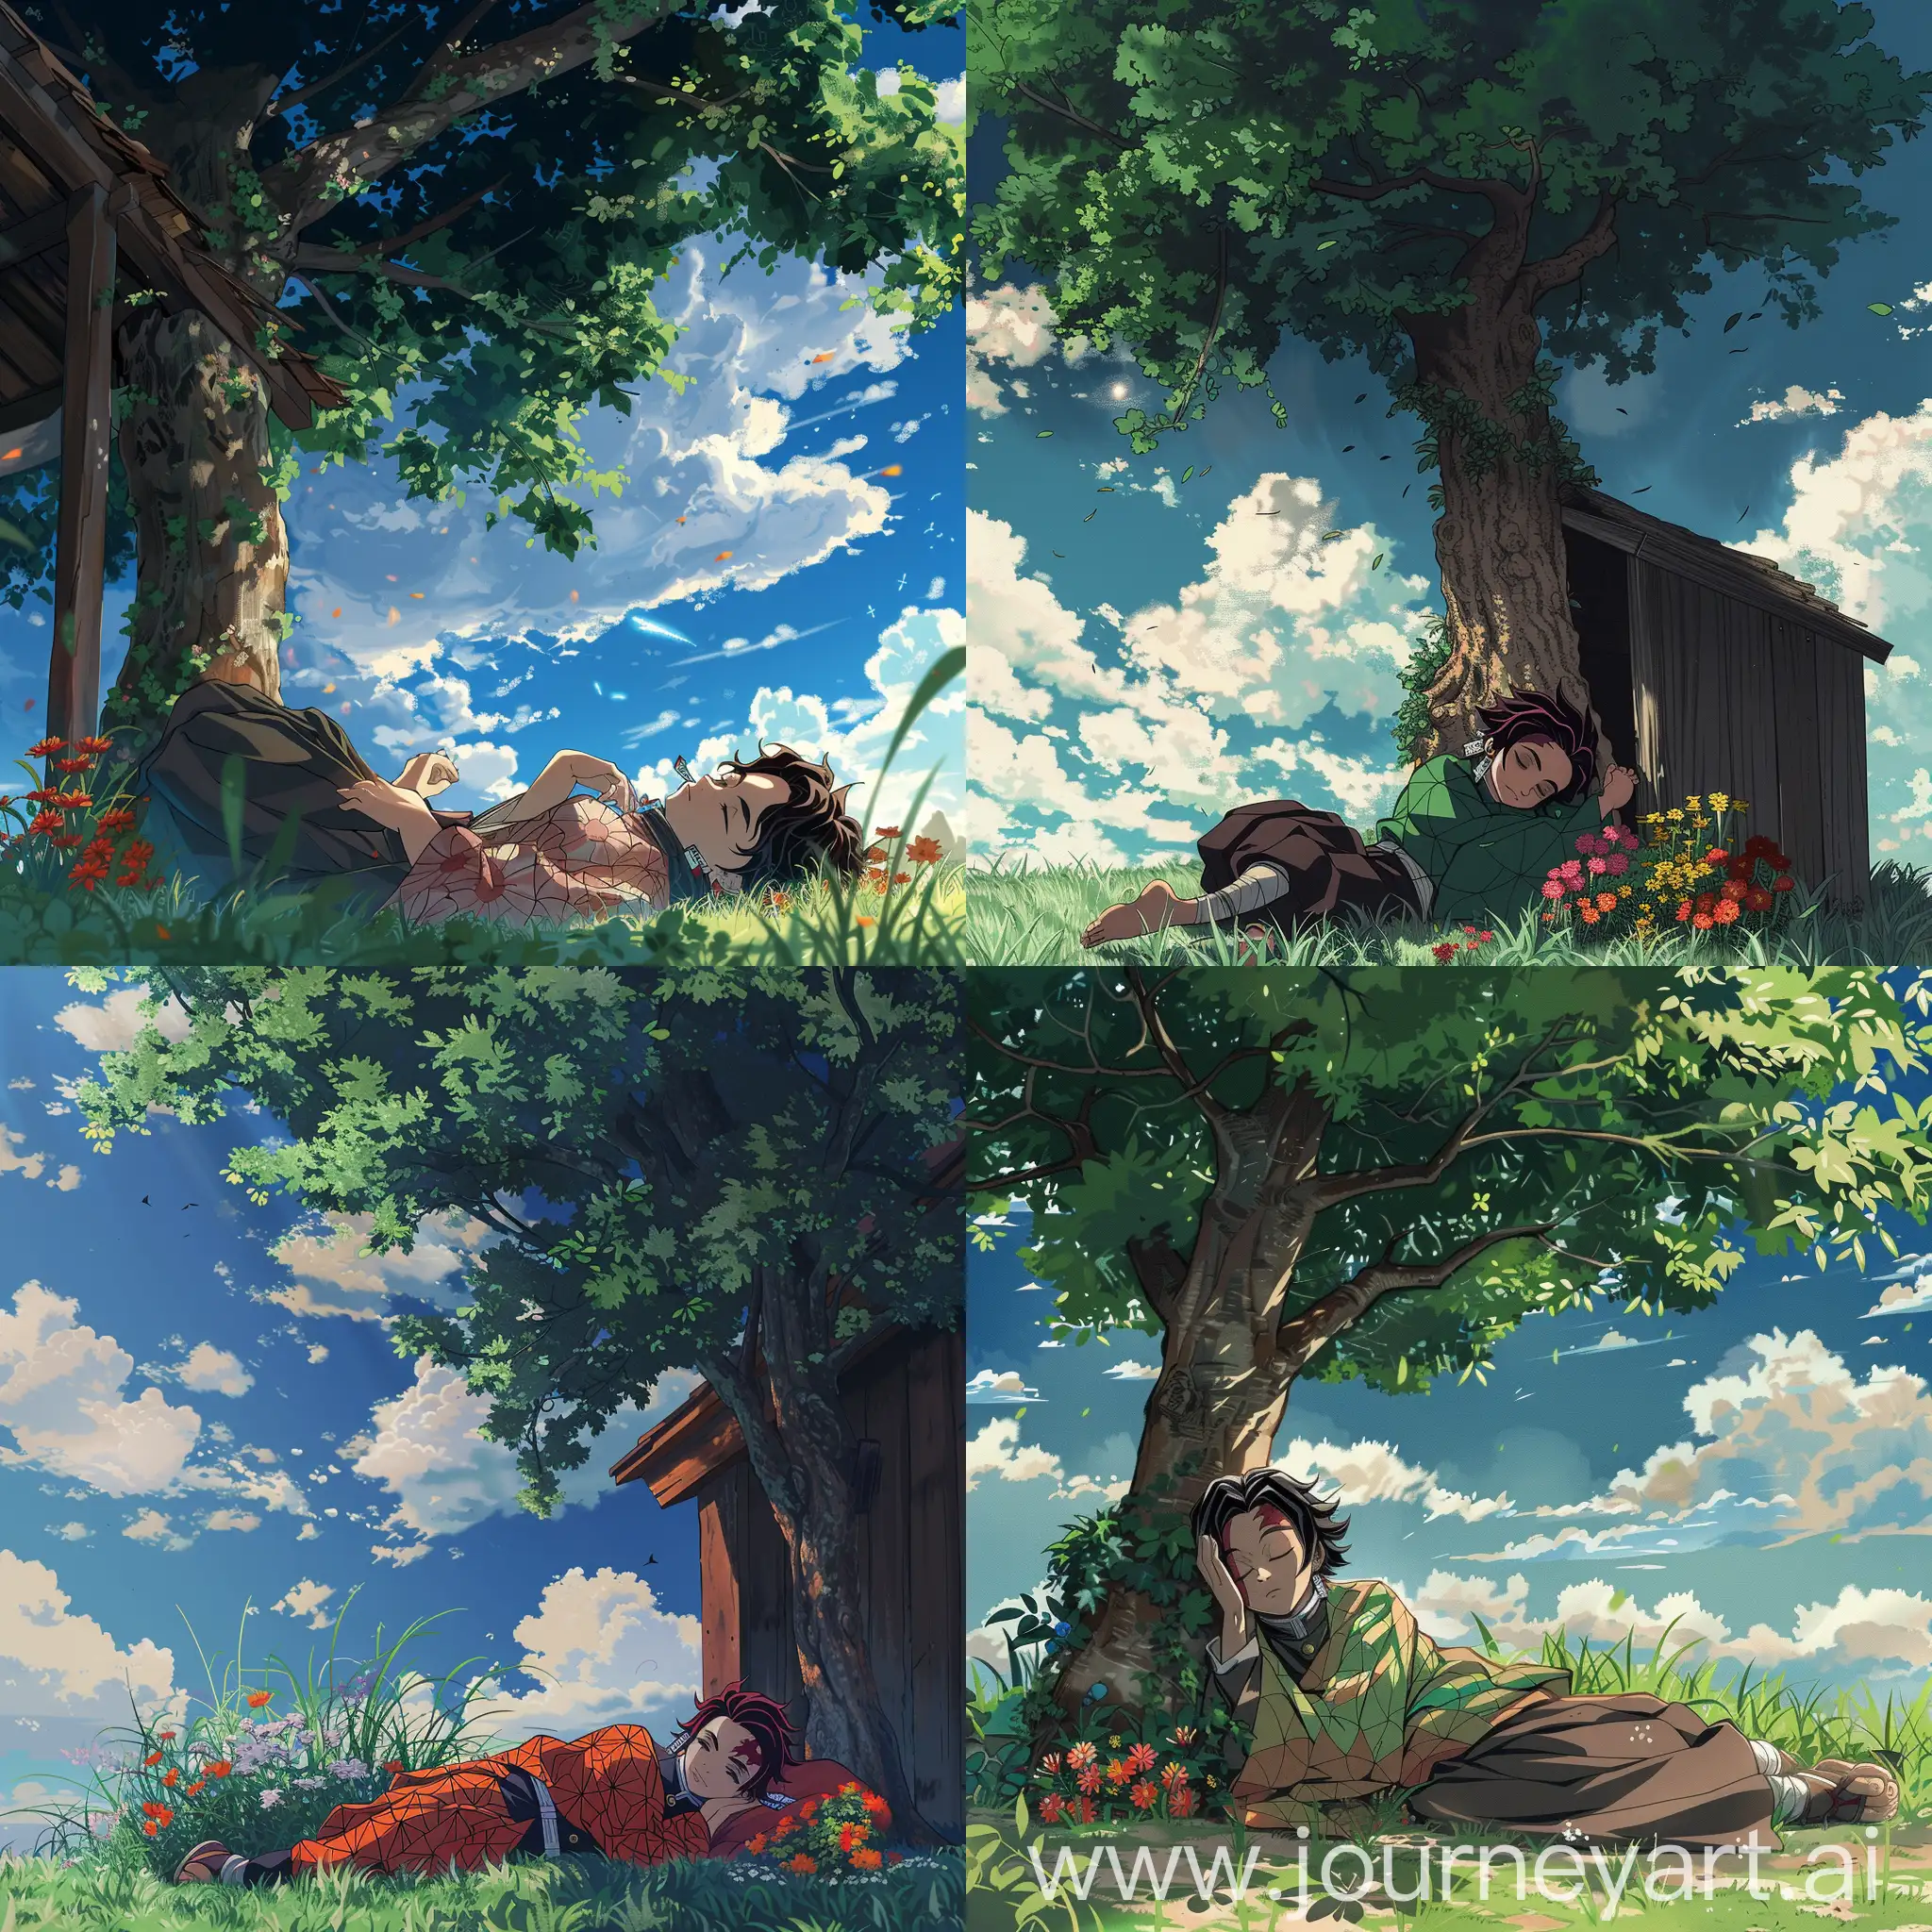 beautiful anime image,makato shinkai style,Inosuke form the anime demon slayer resting under a shed of a tree, a little bit of grass,some vibrant flower alongside the tree,beautiful sky,with fluffy long clouds,beautiful summers,avoid distorted view of inosuke,avoid missing fingers,distorted body of inosuke,avoid bad body view,inosuke should look like inosuke inspired from the anime demon slayer,avoid bad composition,avoid misplacing.